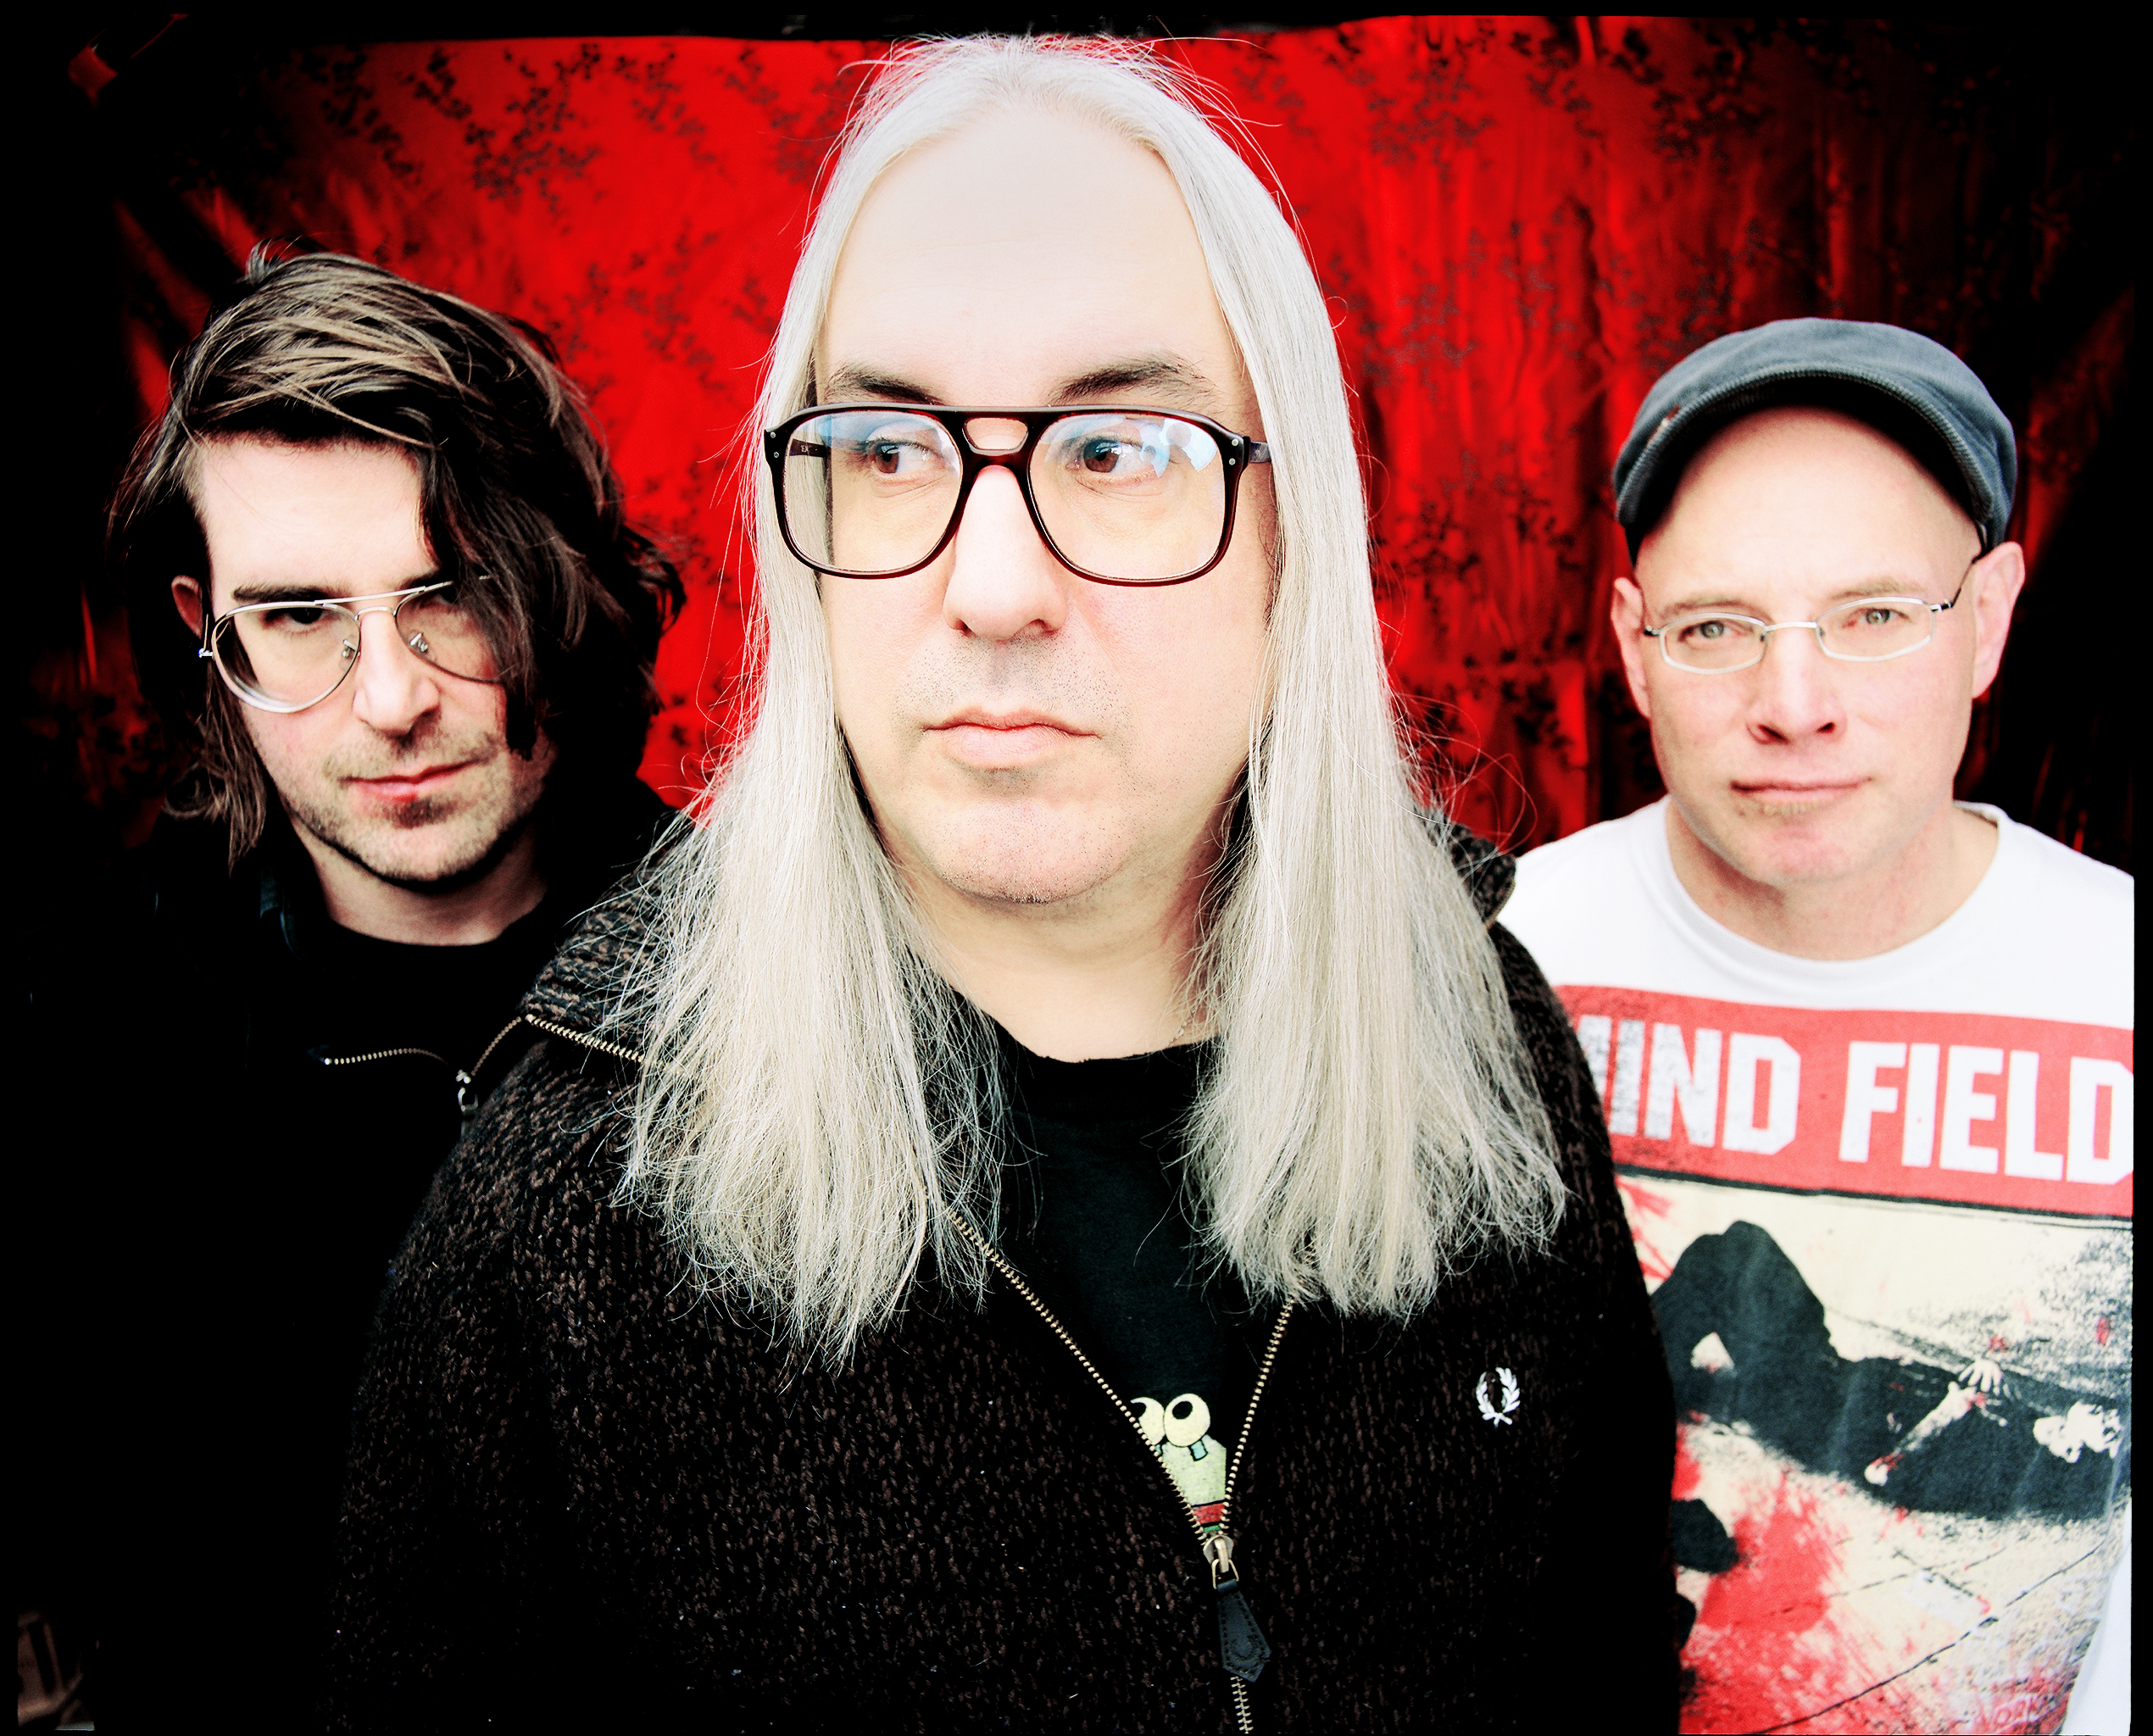 Download free MP3 of new Dinosaur Jr track ‘I Don’t Want You To Know’